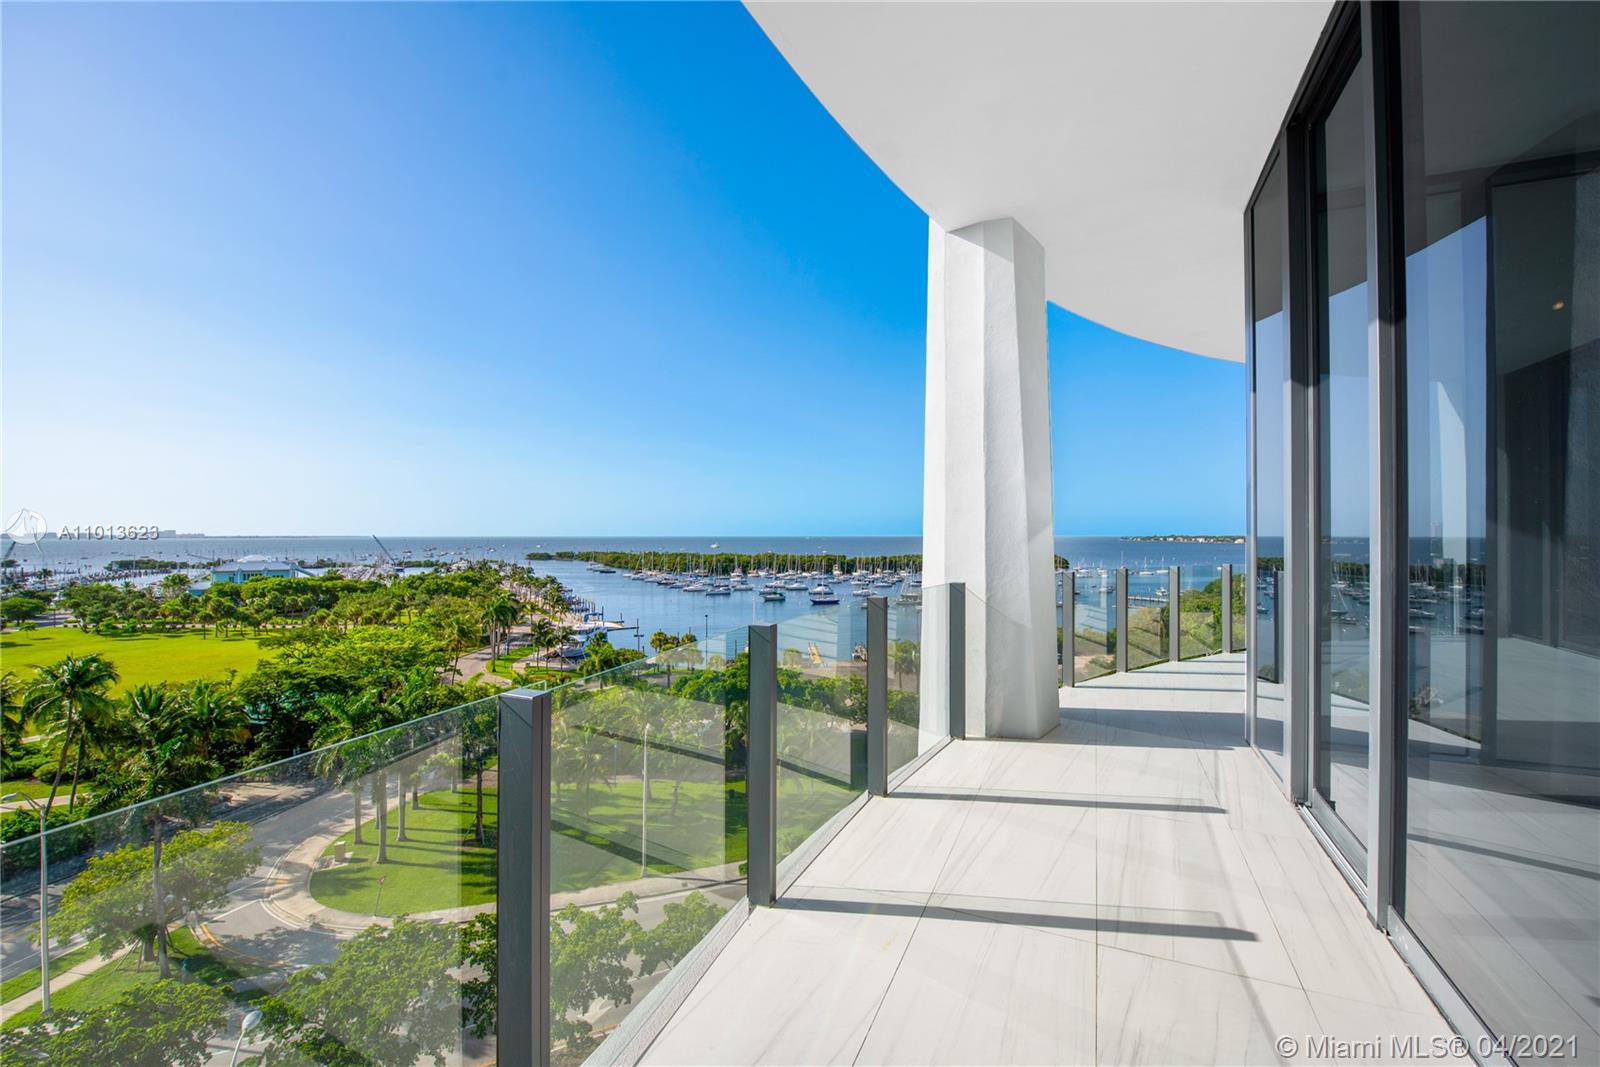 Located in the sophisticated One Park Grove, rarely available A line. Four bedrooms, Five and a Half bathrooms corner residence. This spacious 3,592 SF home offers an oversized balcony with spectacular views of Biscayne Bay. Soaring 12ft ceilings with wrap-around floor-to-ceiling glass. Your private elevator opens to your own foyer. The kitchen, designed by William Sofield, includes Italian cabinetry with marble counter-tops, an eat-in kitchen, Wolf and Sub-Zero appliances. Designed by Pritzker Prize-winning Architect Rem Koolhaas/OMA, Park Grove is the epitome of luxury living. Amenities include: valet, pool deck offering incredible views, 5-acres of lush, landscaped grounds, signature spa, children's play areas, 28-seat screening room, and more.